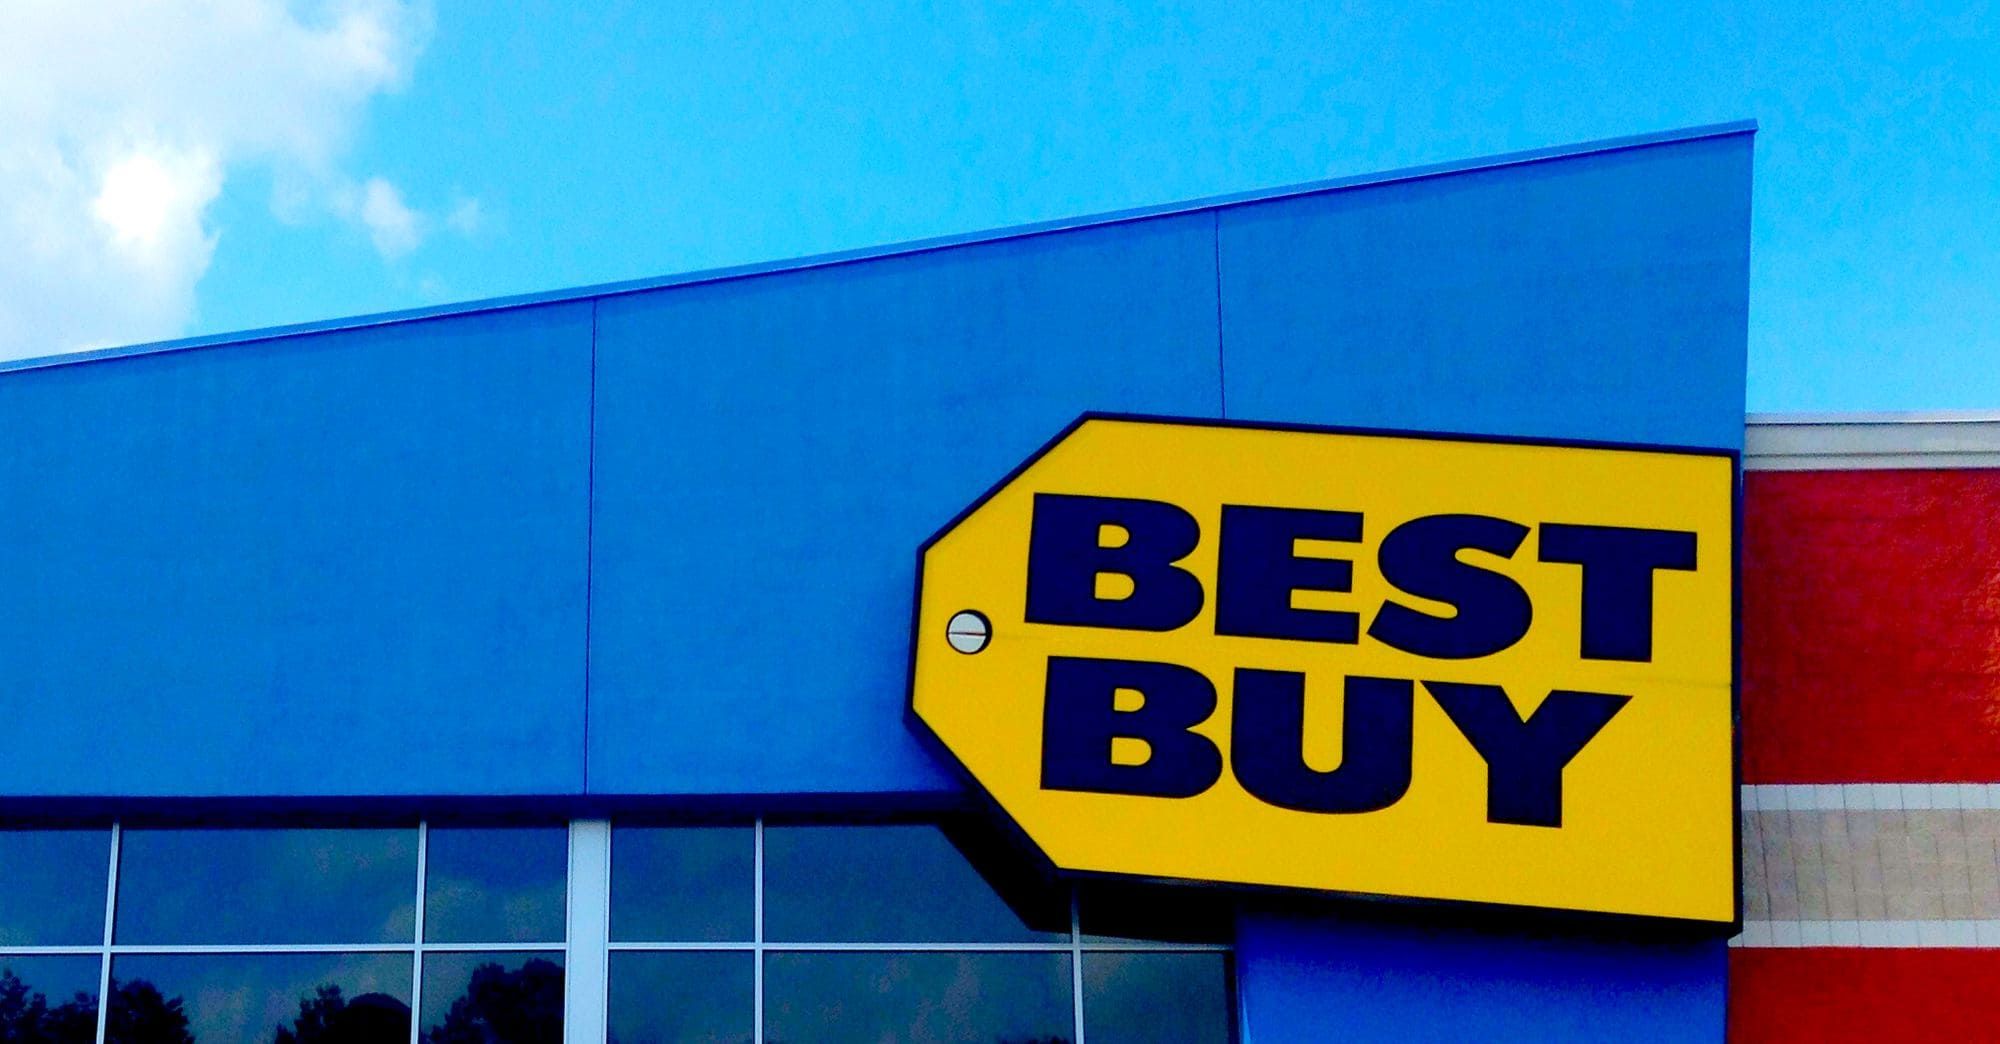 How to scrape Best Buy product data